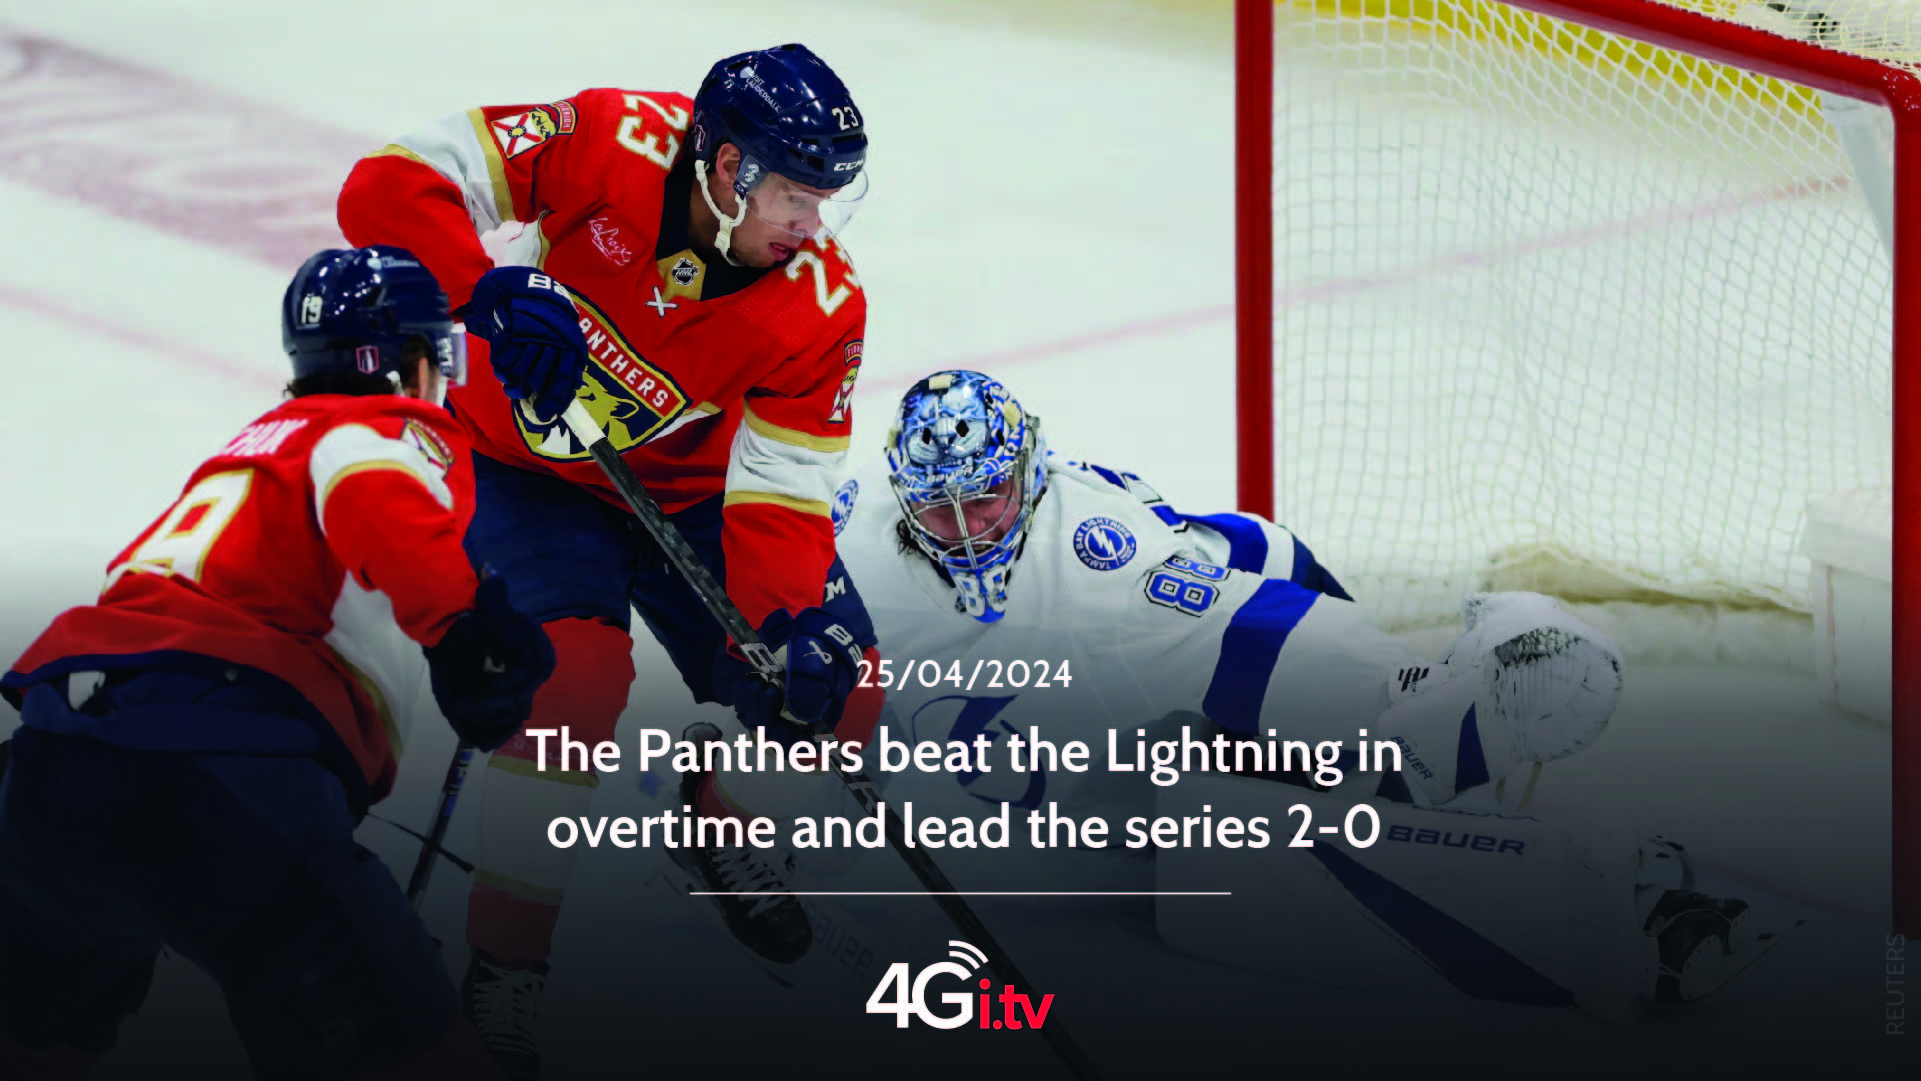 Lee más sobre el artículo The Panthers beat the Lightning in overtime and lead the series 2-0